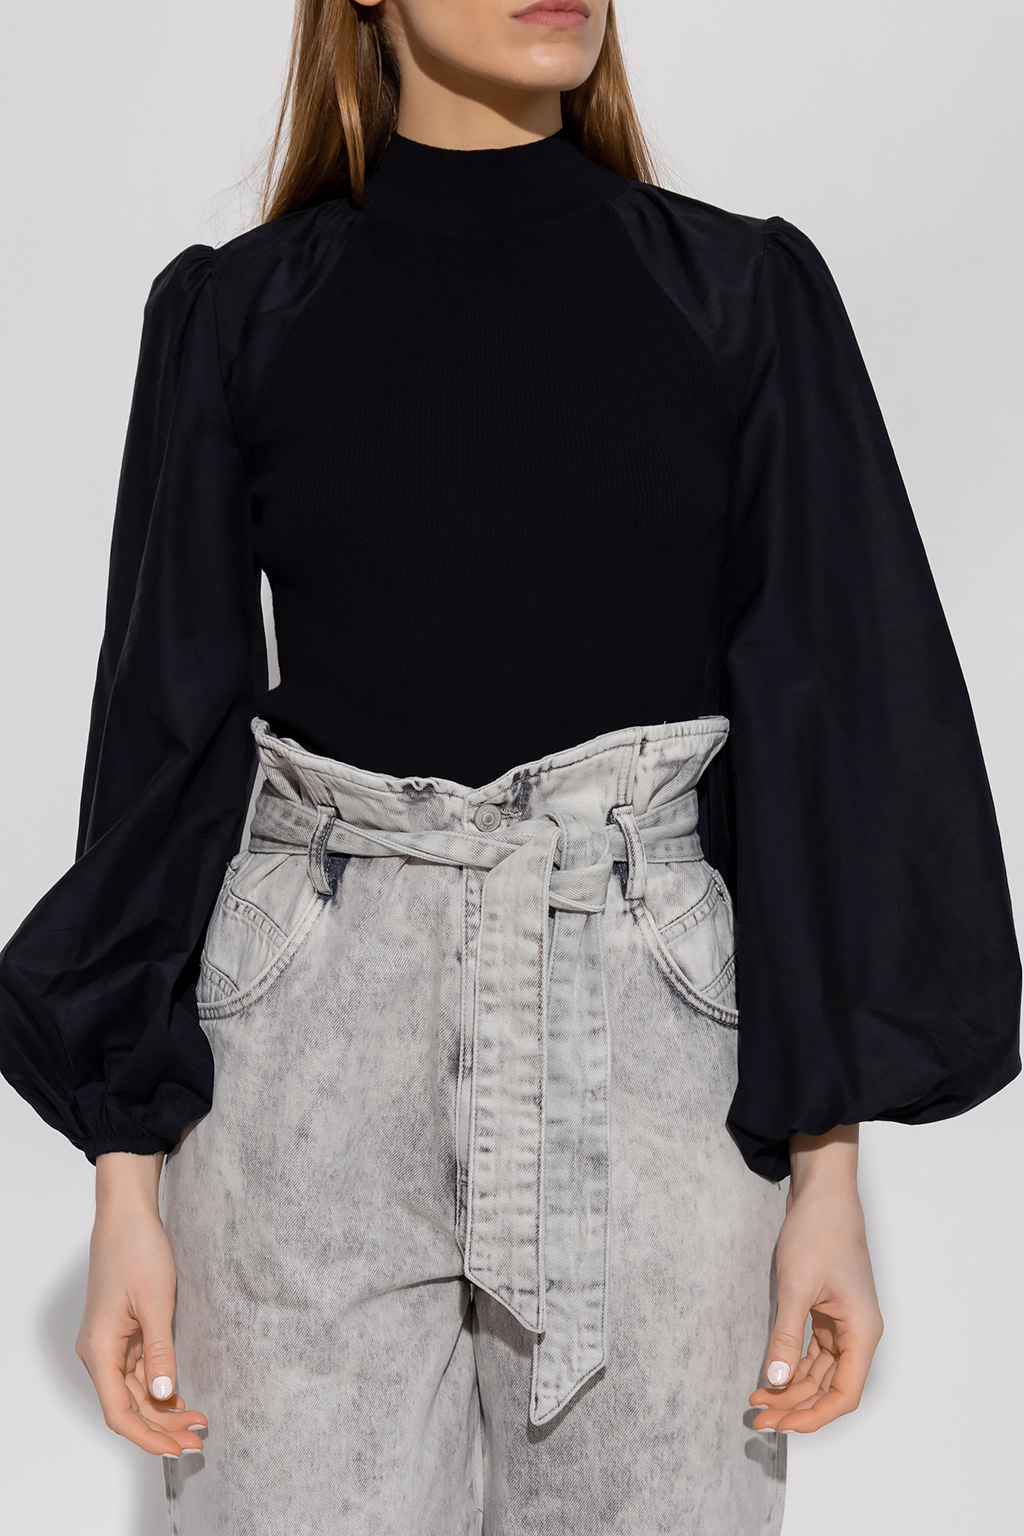 AllSaints ‘Cleo’ top with puff sleeves